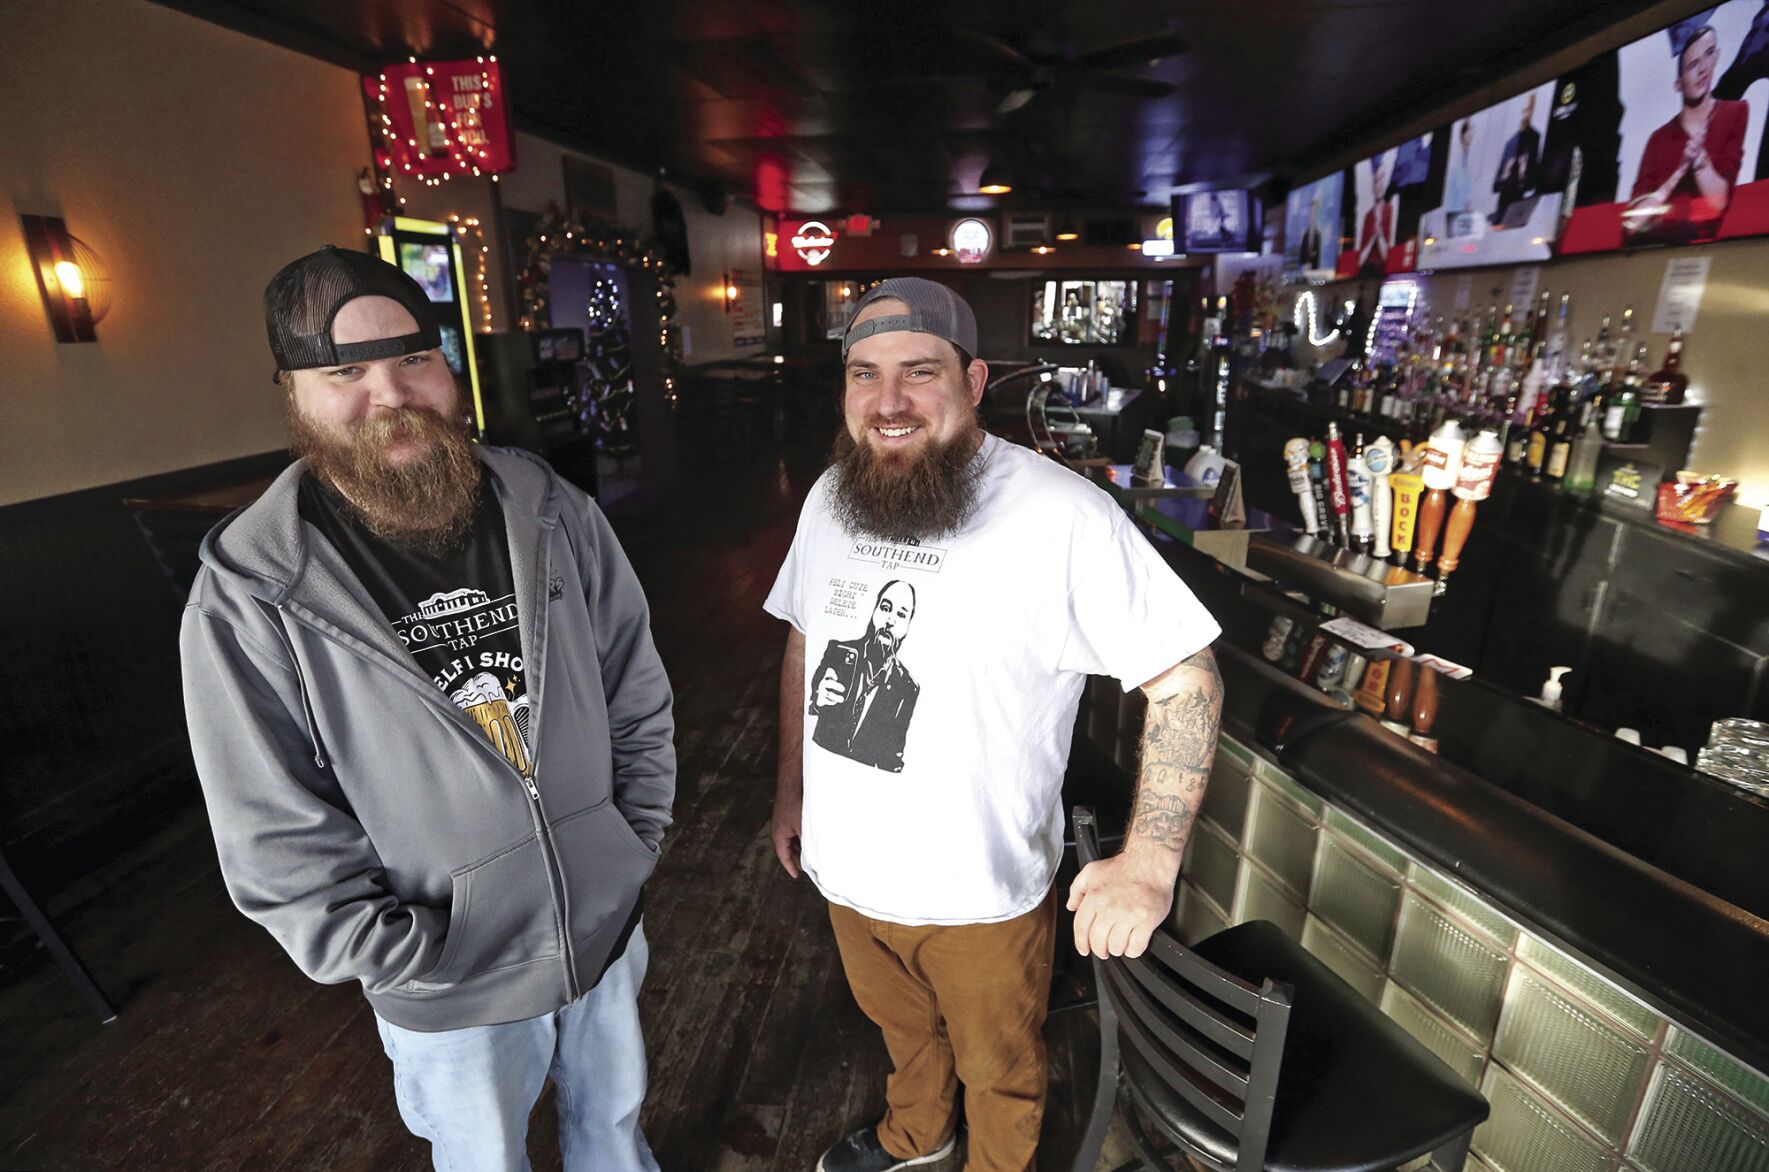 New owners for Dubuque bar; chiropractic office opens; Bellevue inn owner to open chocolate shop, bakery – BizTimes.biz